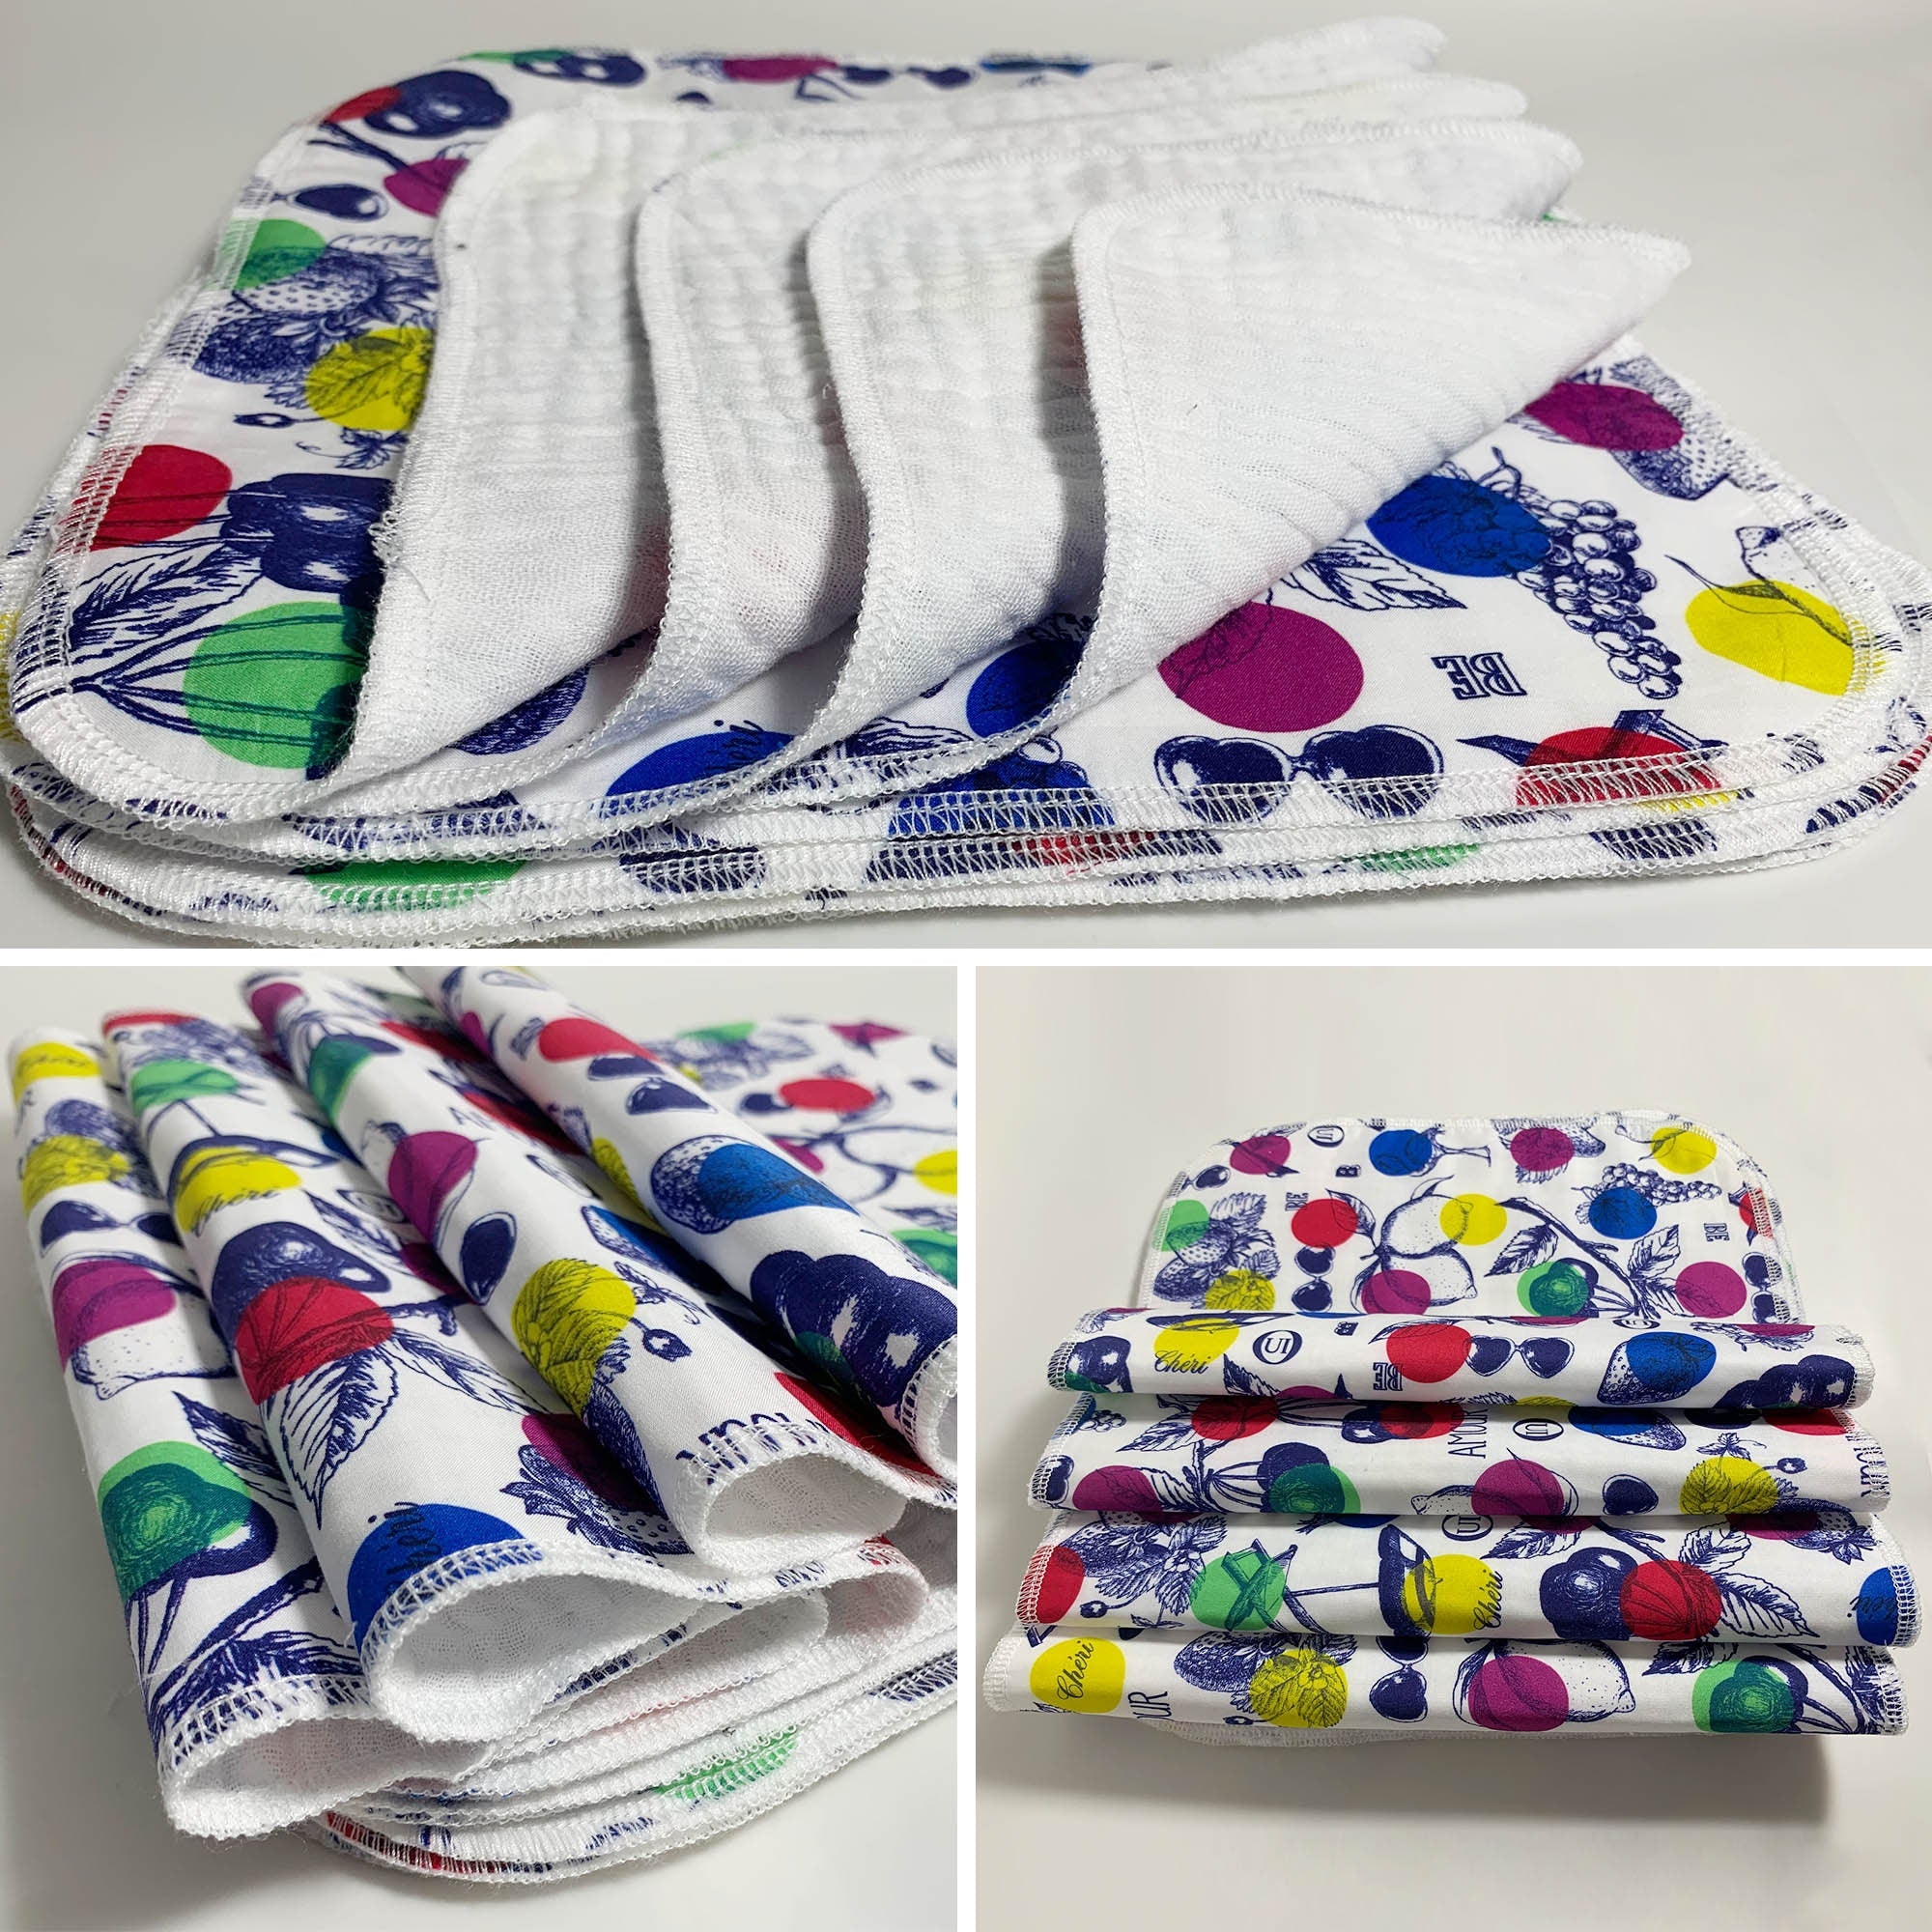 Multi-use Soft Paperless kitchen towels，Zero waste, Printed Fabric with Triple Gauze Cloth Towels , Set of 12 - Happy Fruits